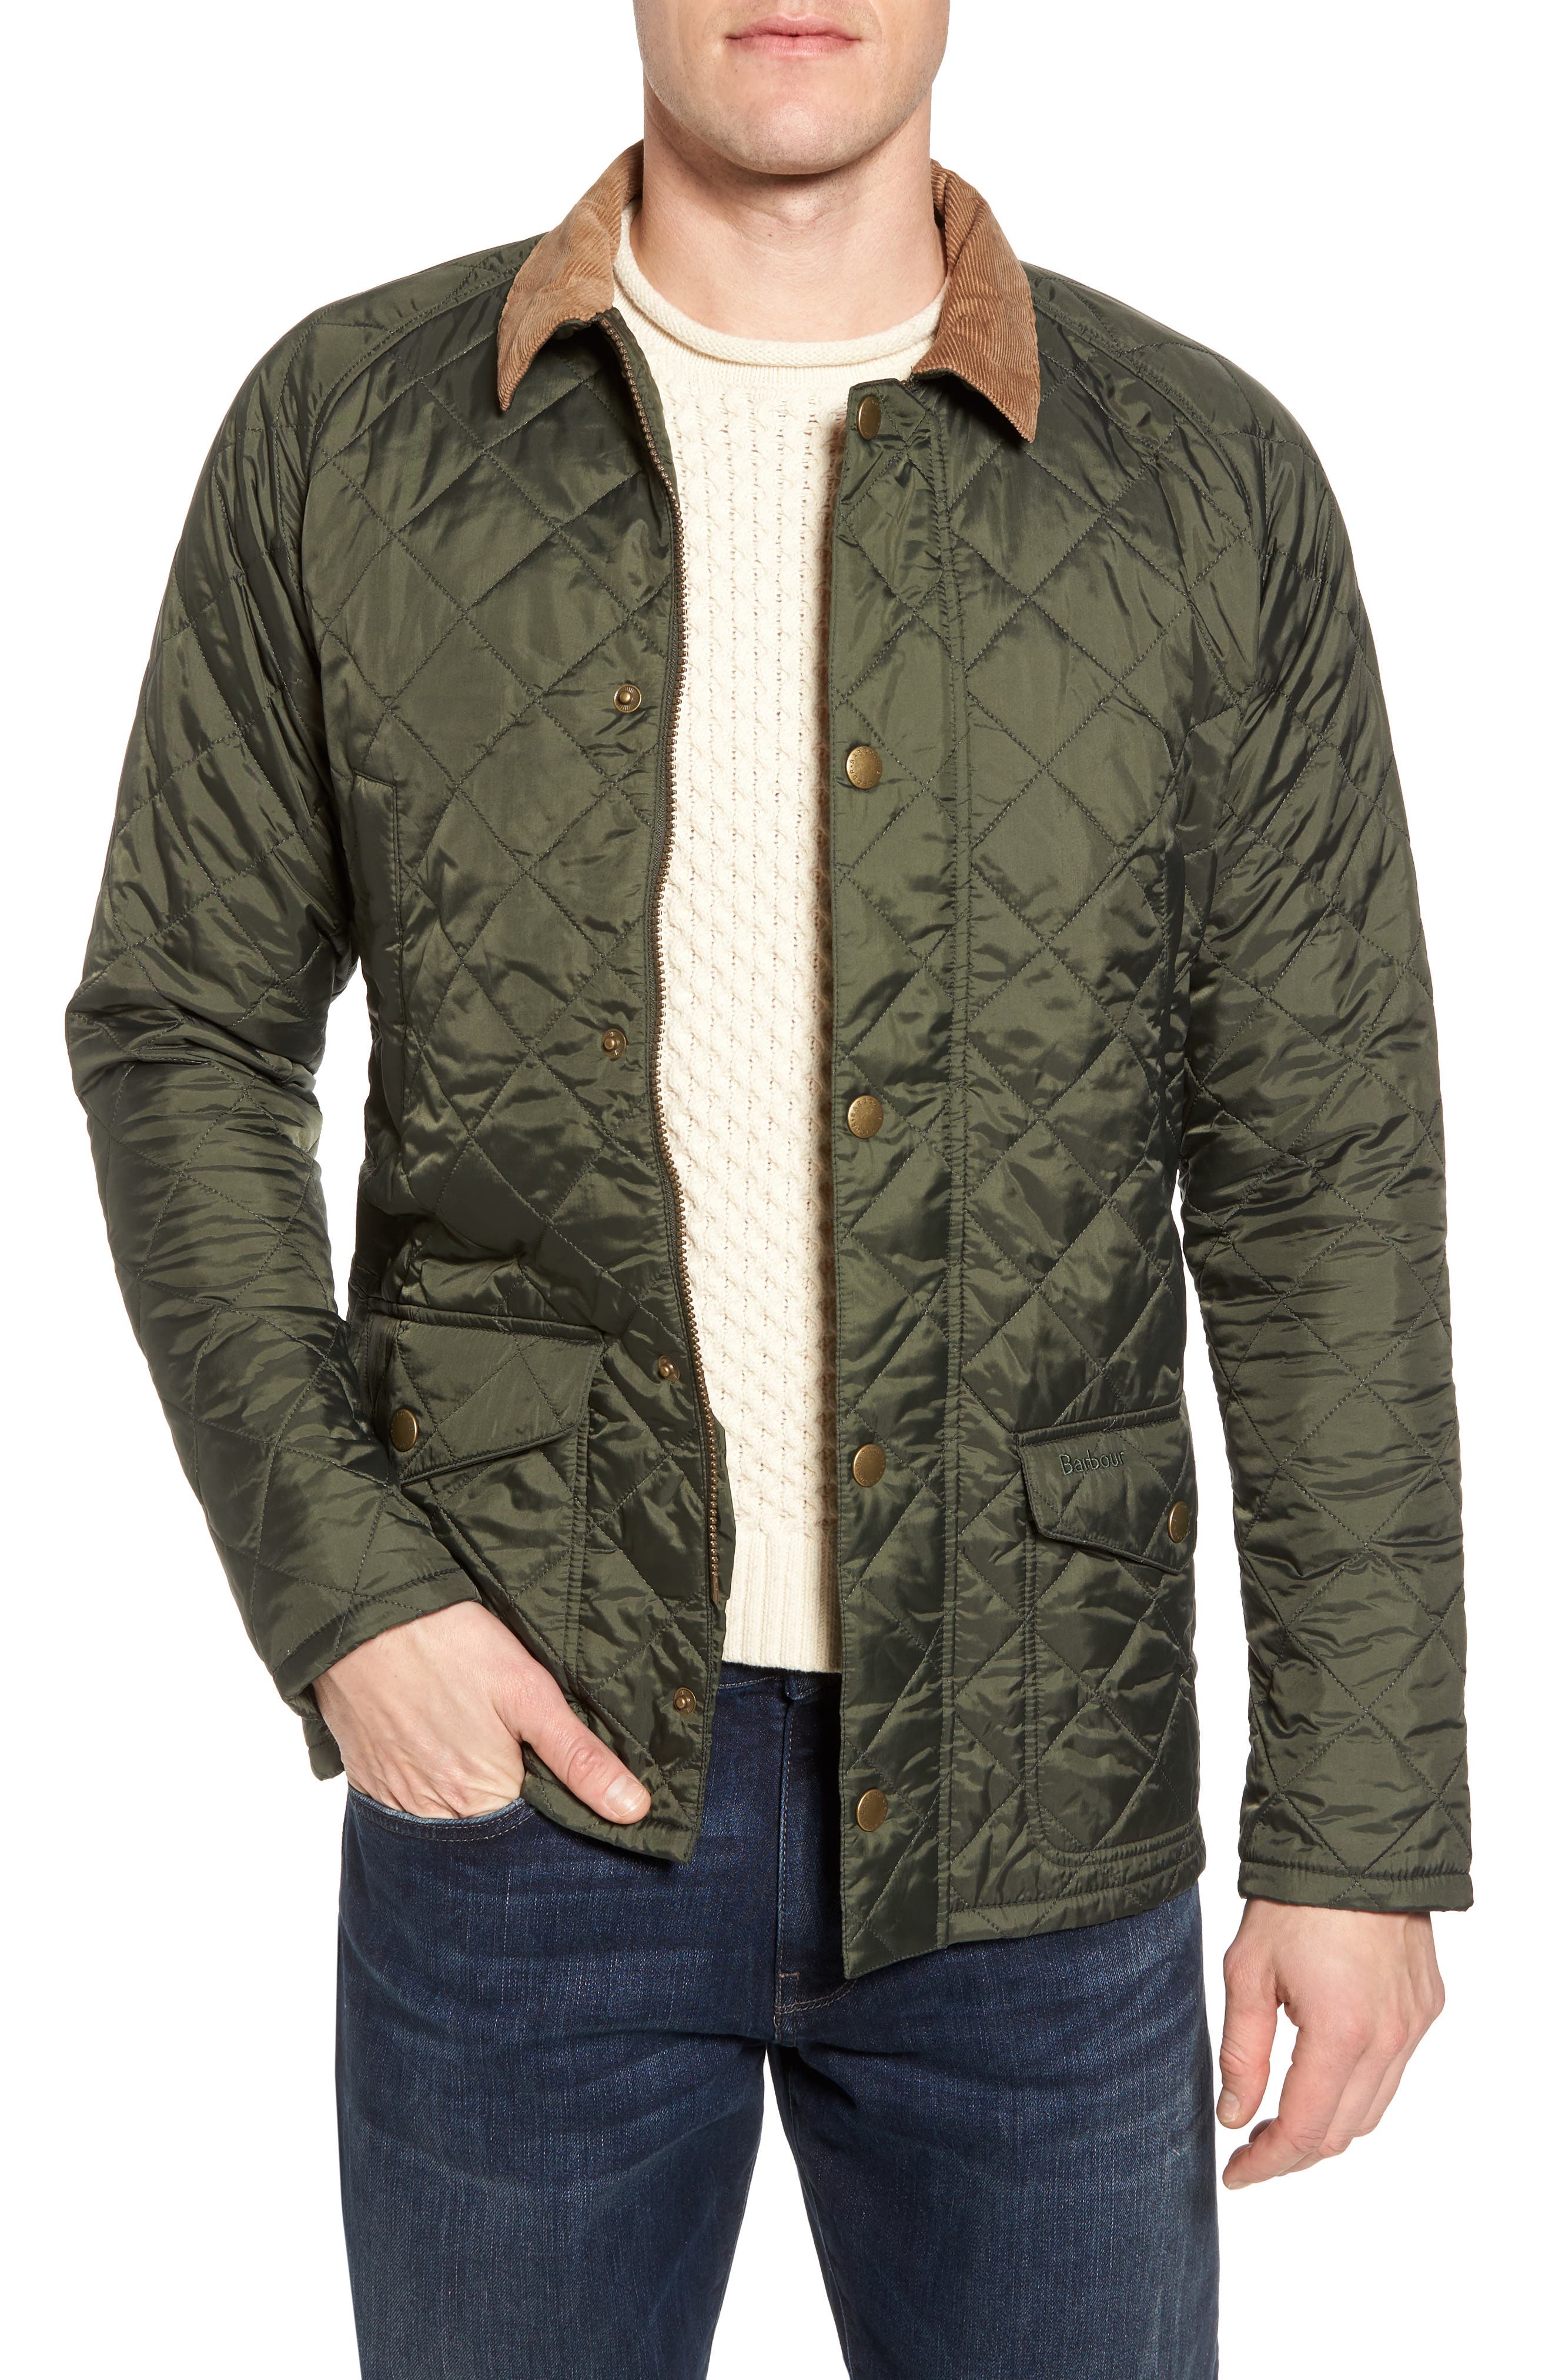 barbour quilted jacket canada